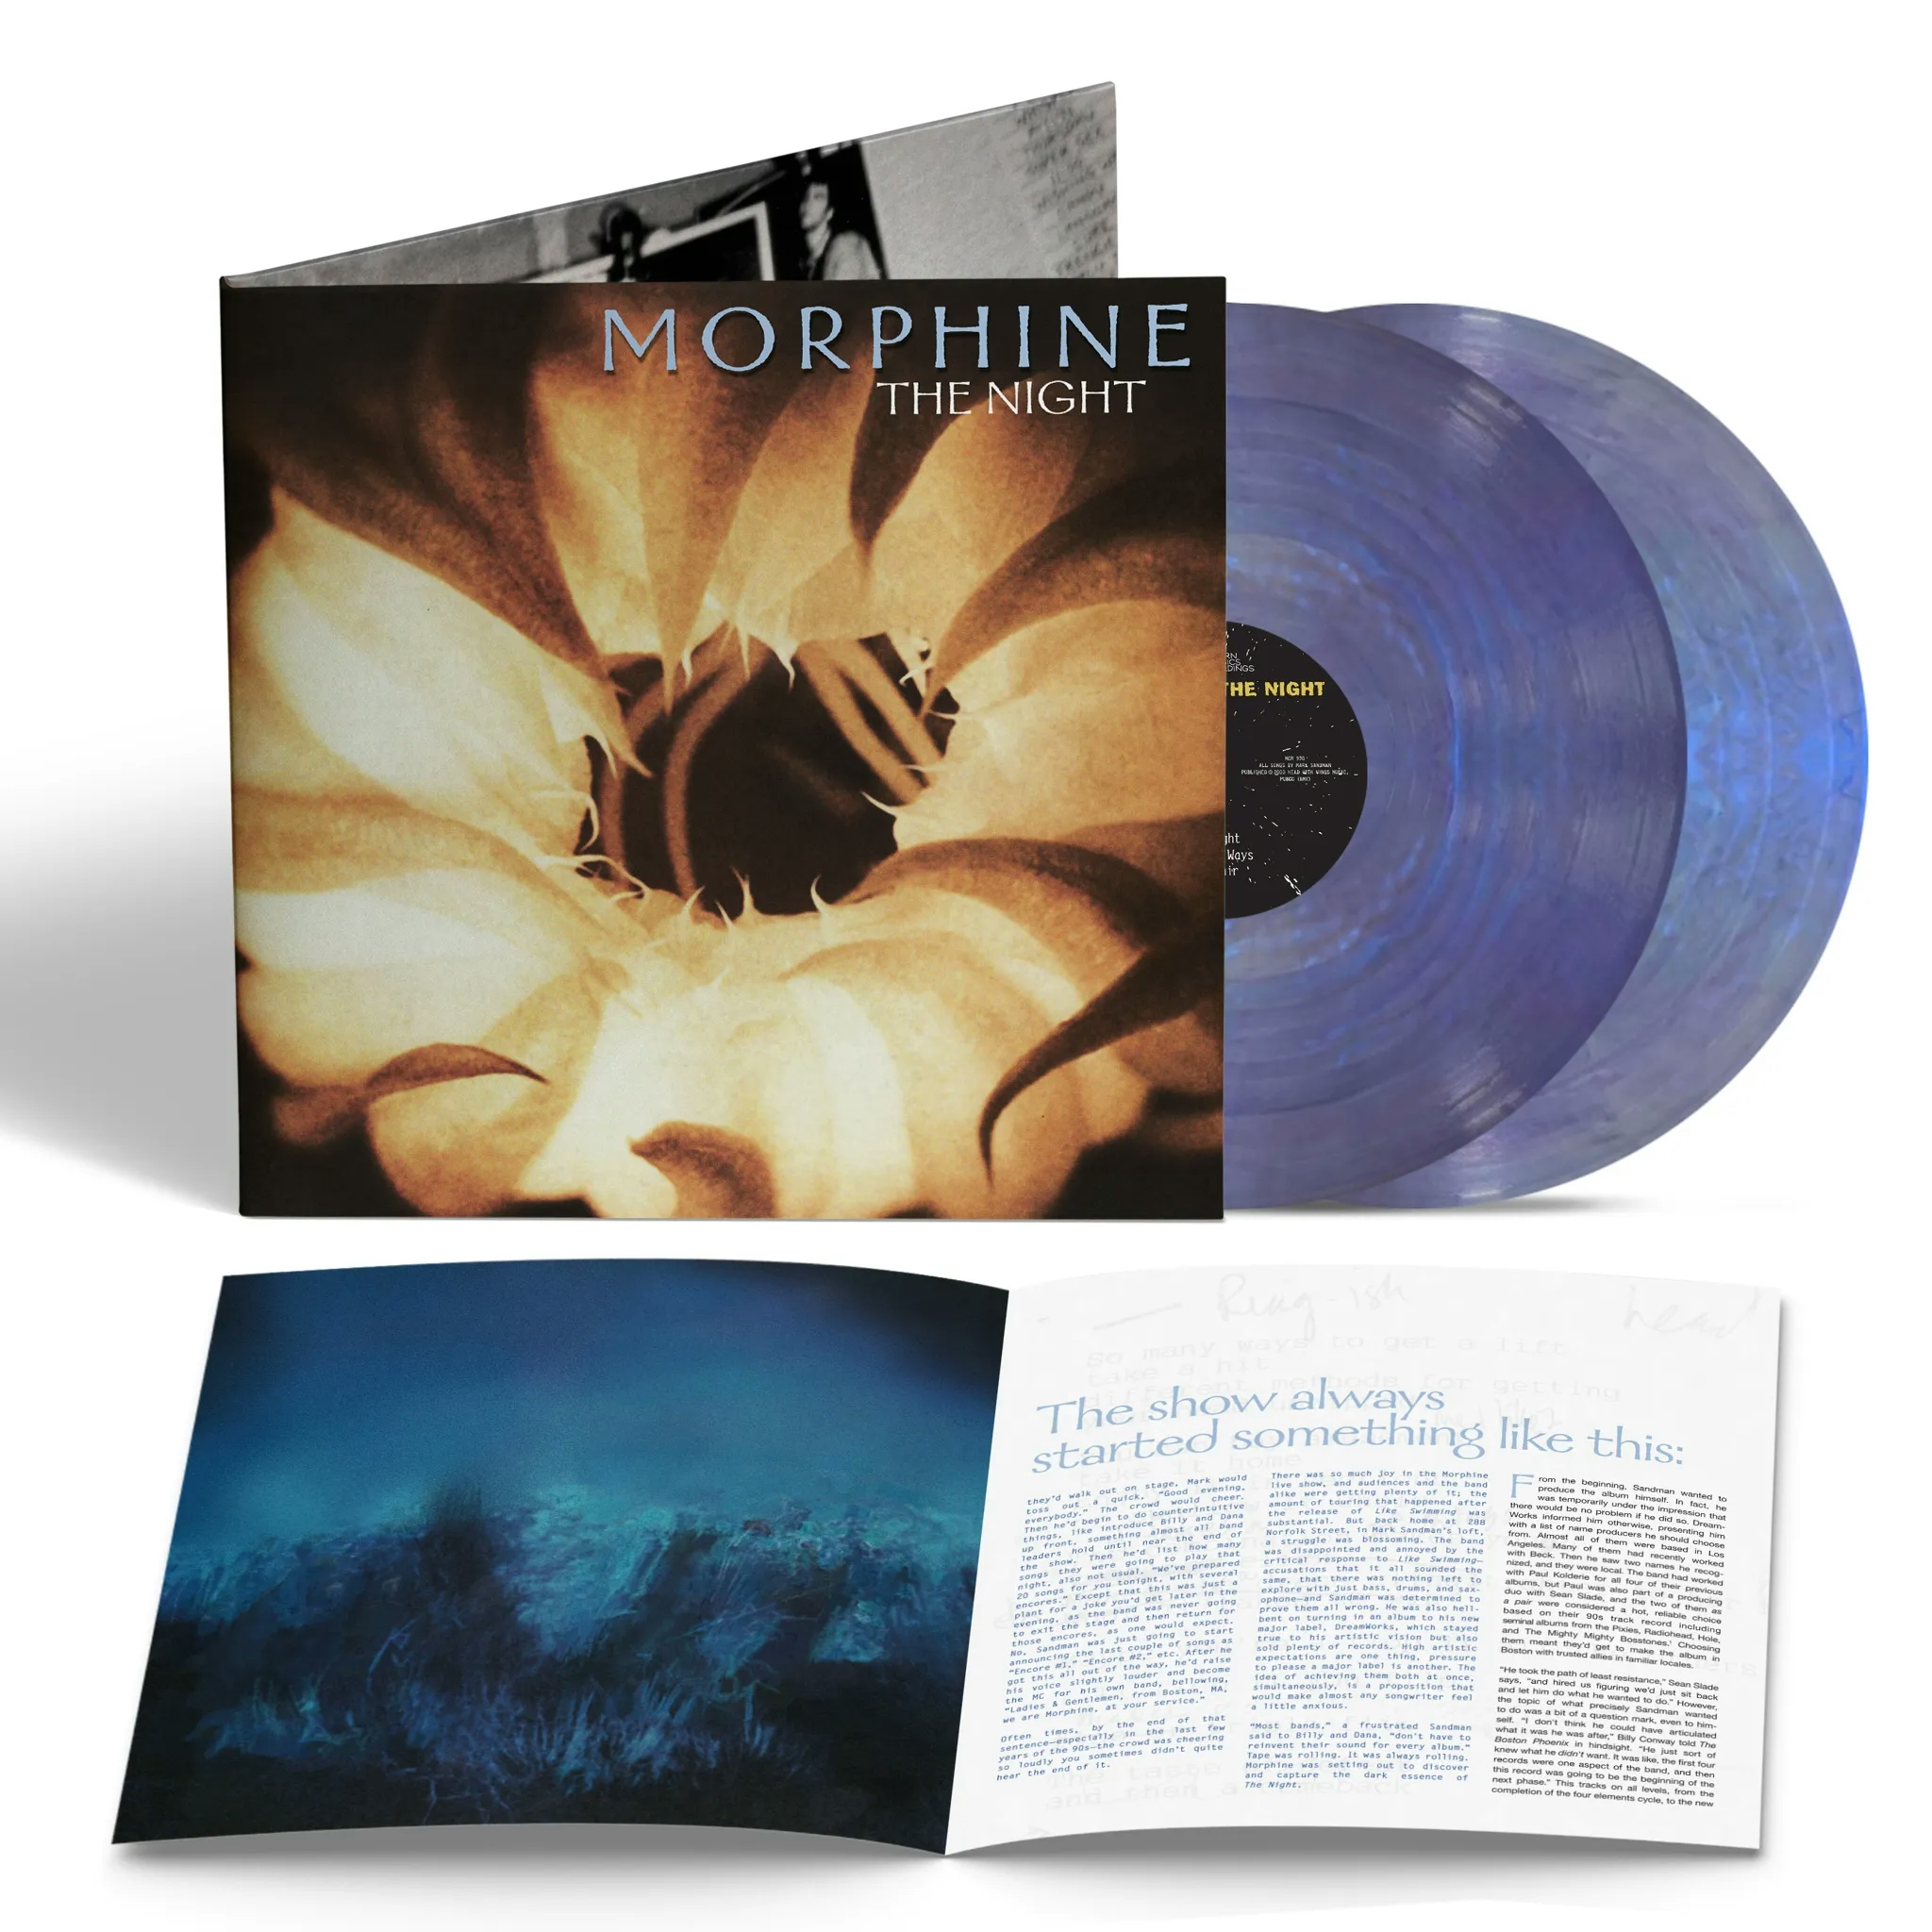 Album artwork for The Night by Morphine